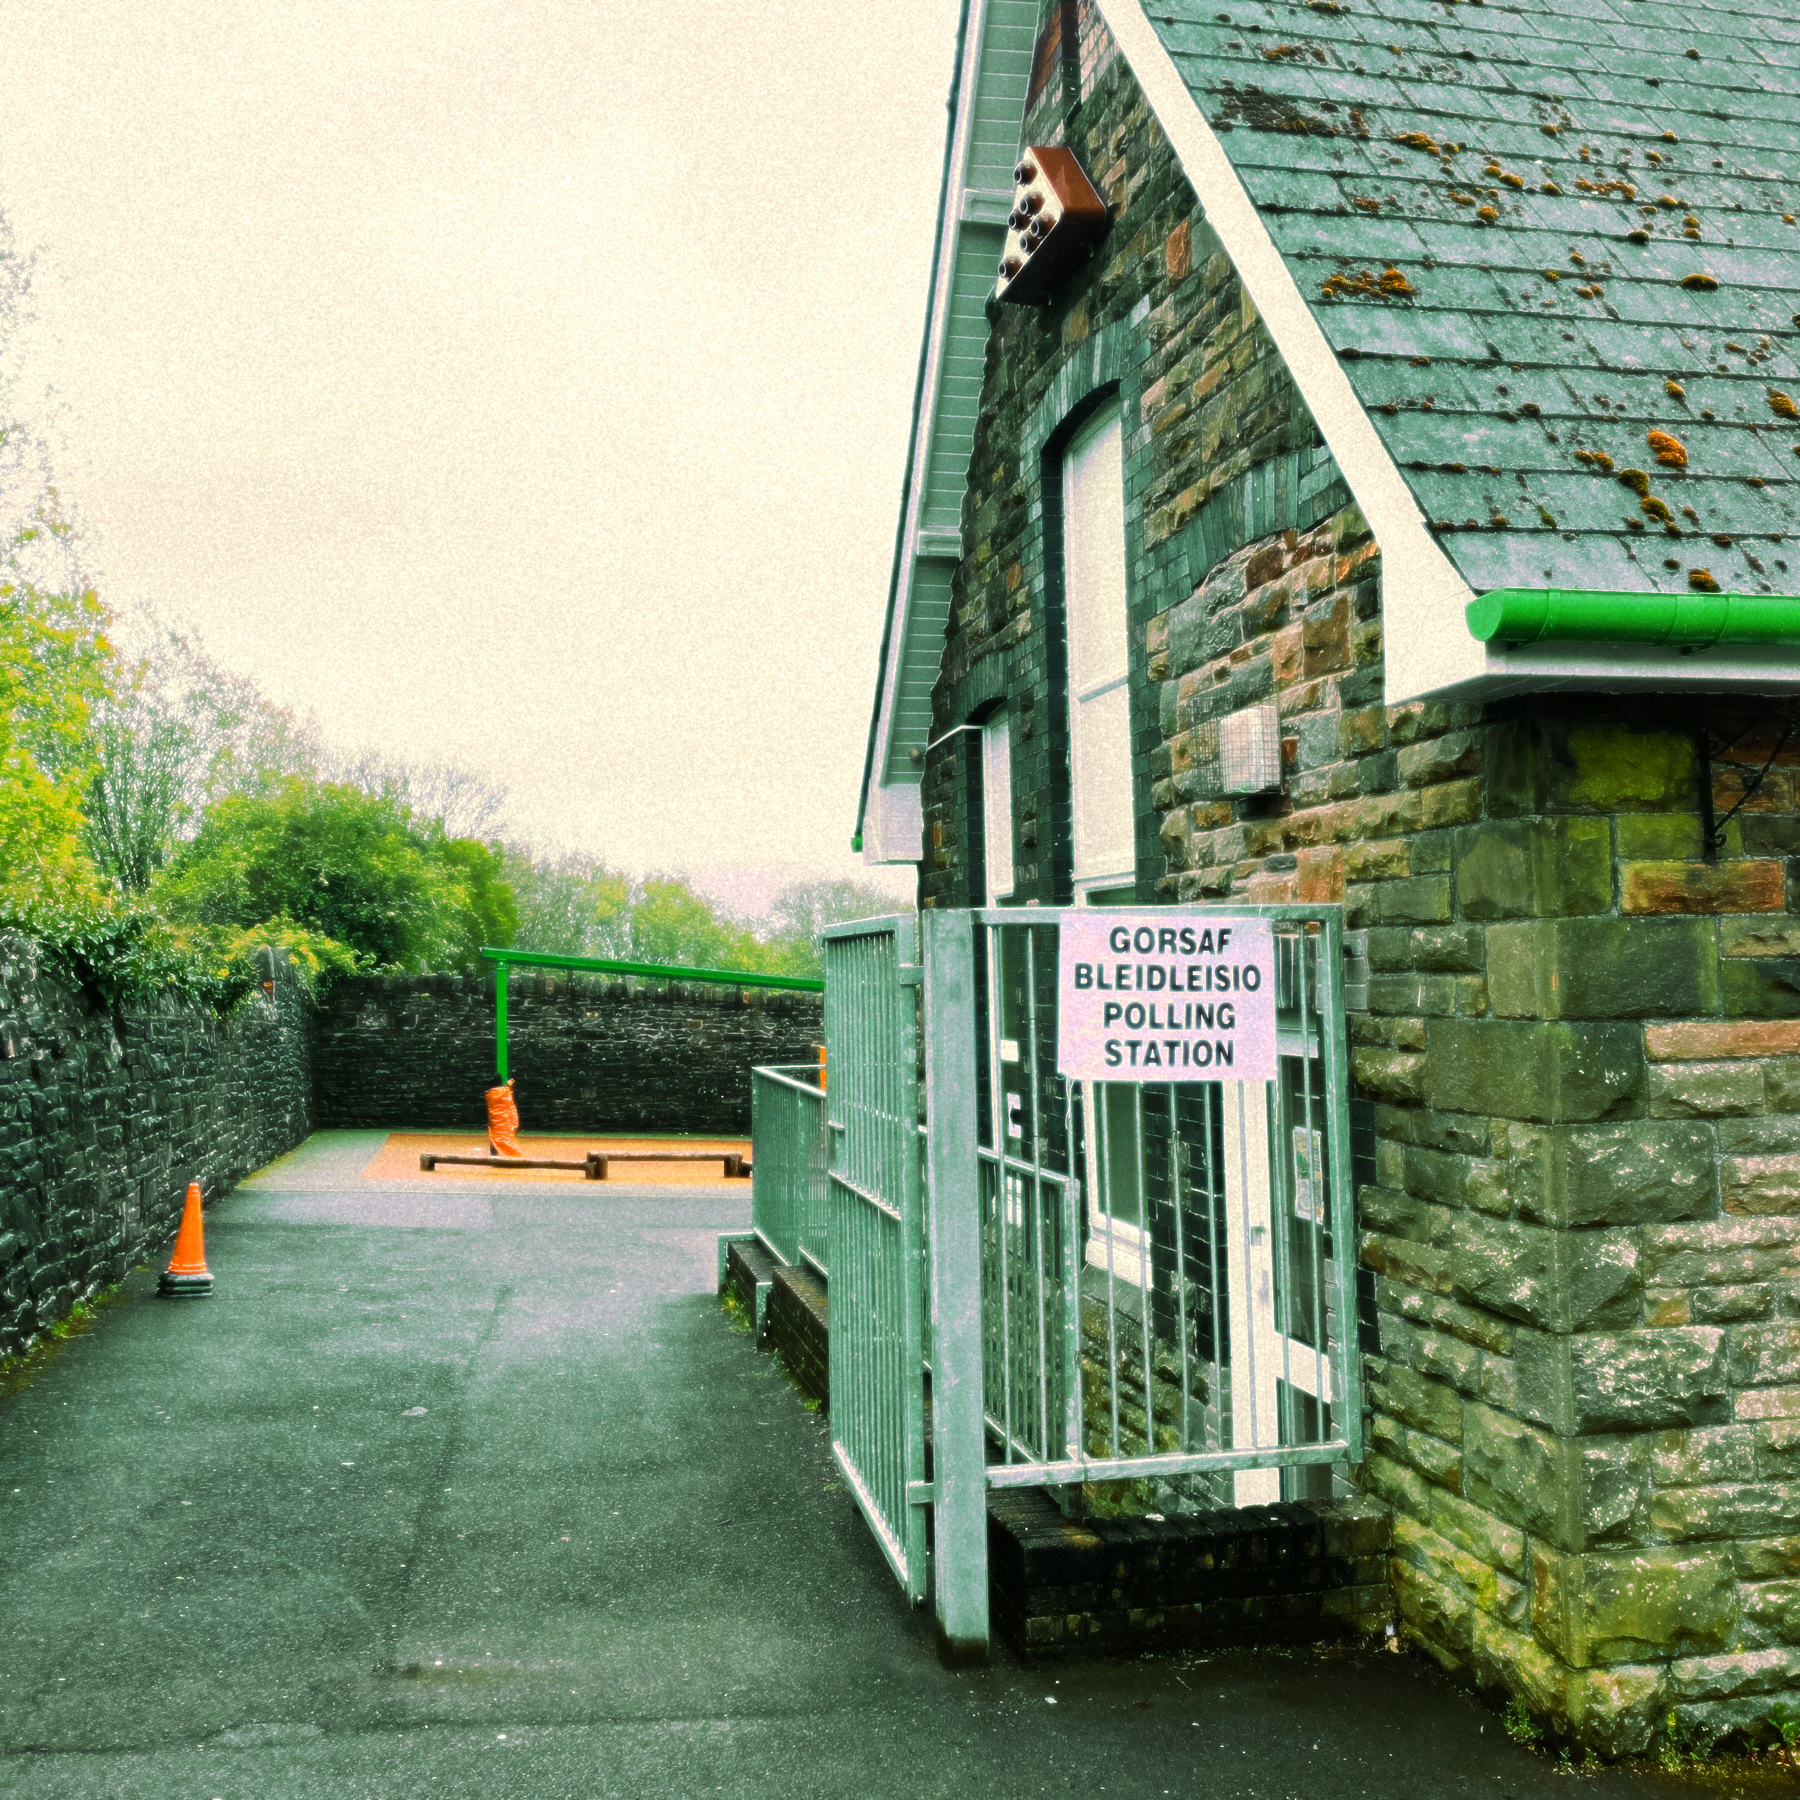 Old stone building, yard and walls with a Polling Station sign in Welsh and English pinned up on fencing outside